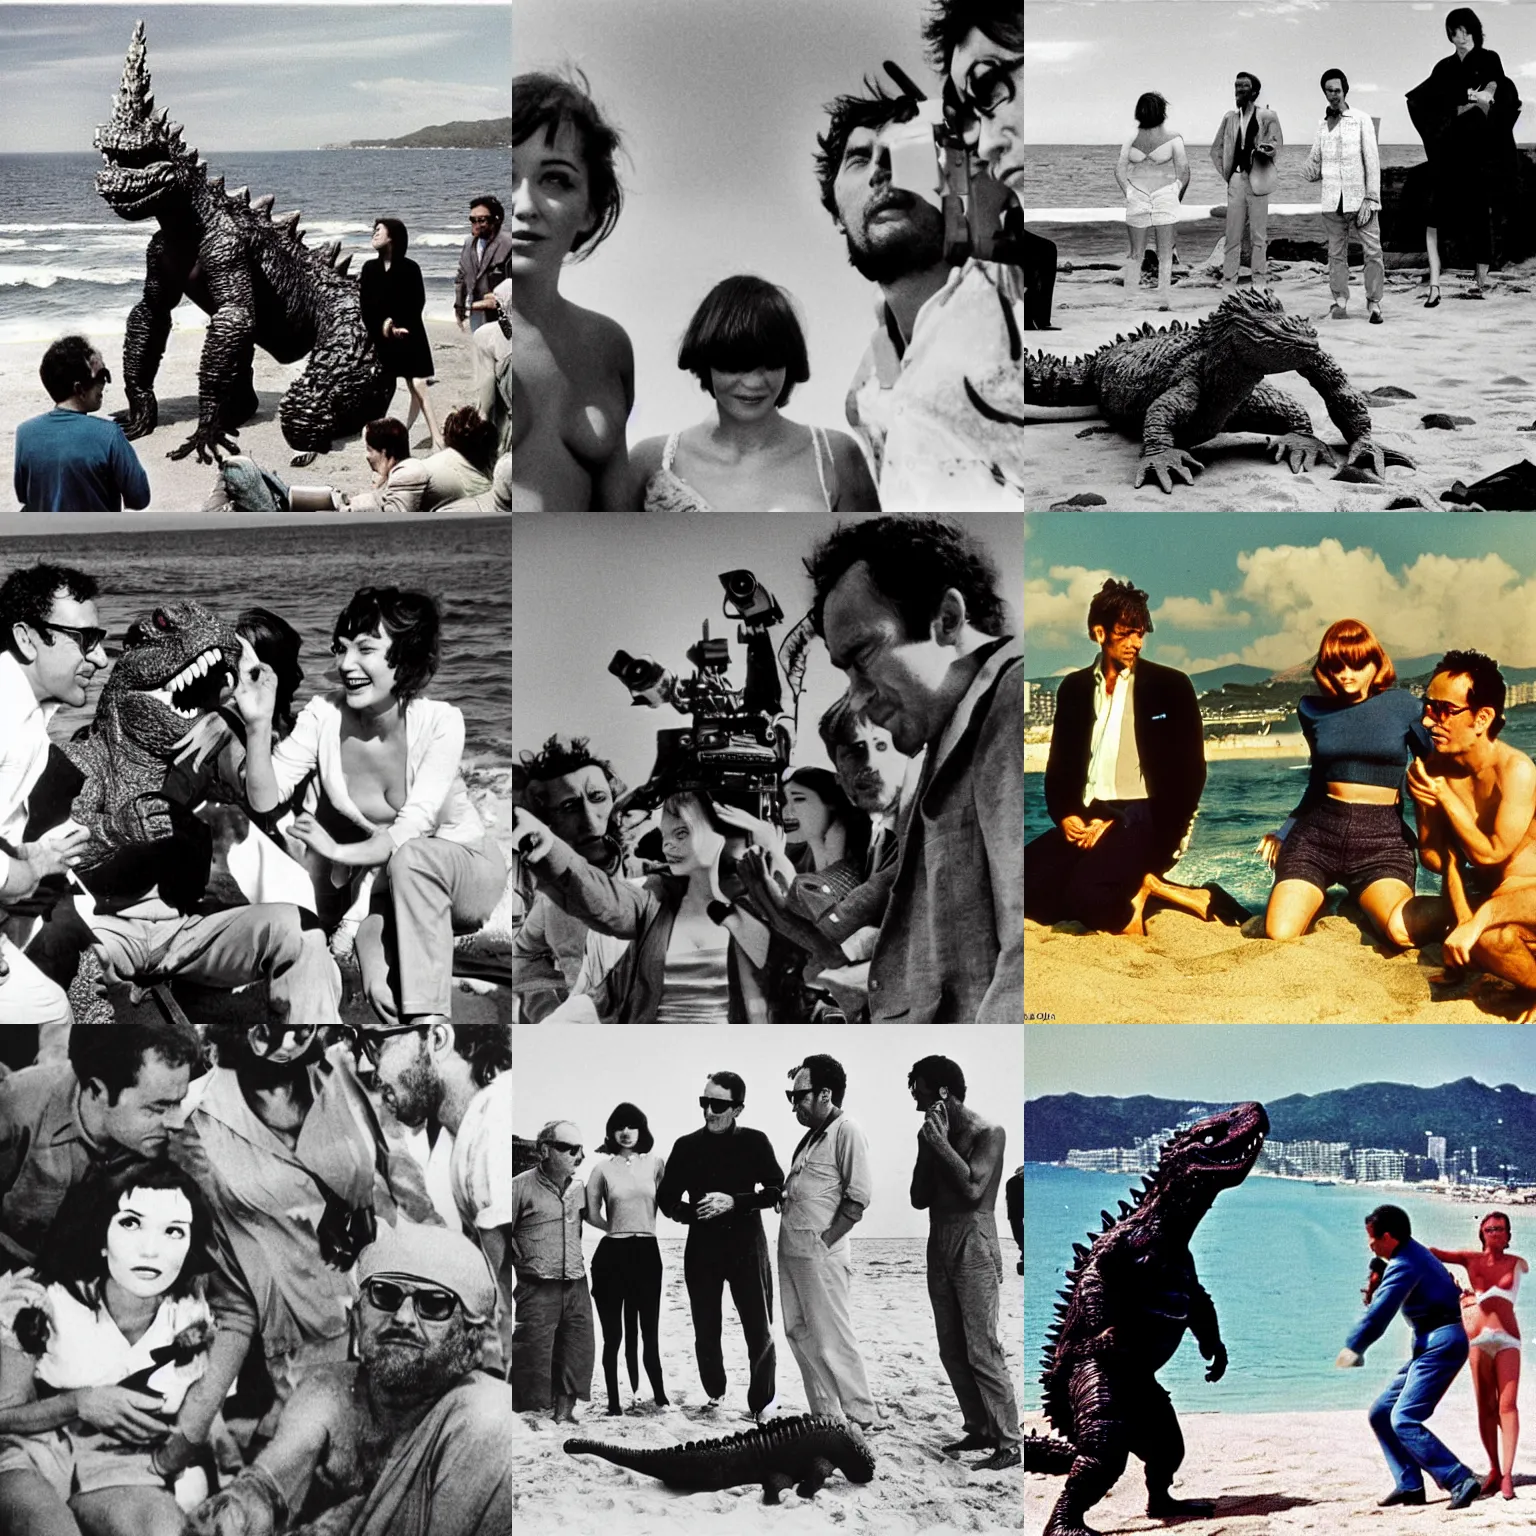 Prompt: photoshoot in technicolor of godzilla on a beach in cannes. godzilla is at the center surrounded by jean - luc godard and anna karina. in color. close - up on godzilla, jean - luc godard and anna karina